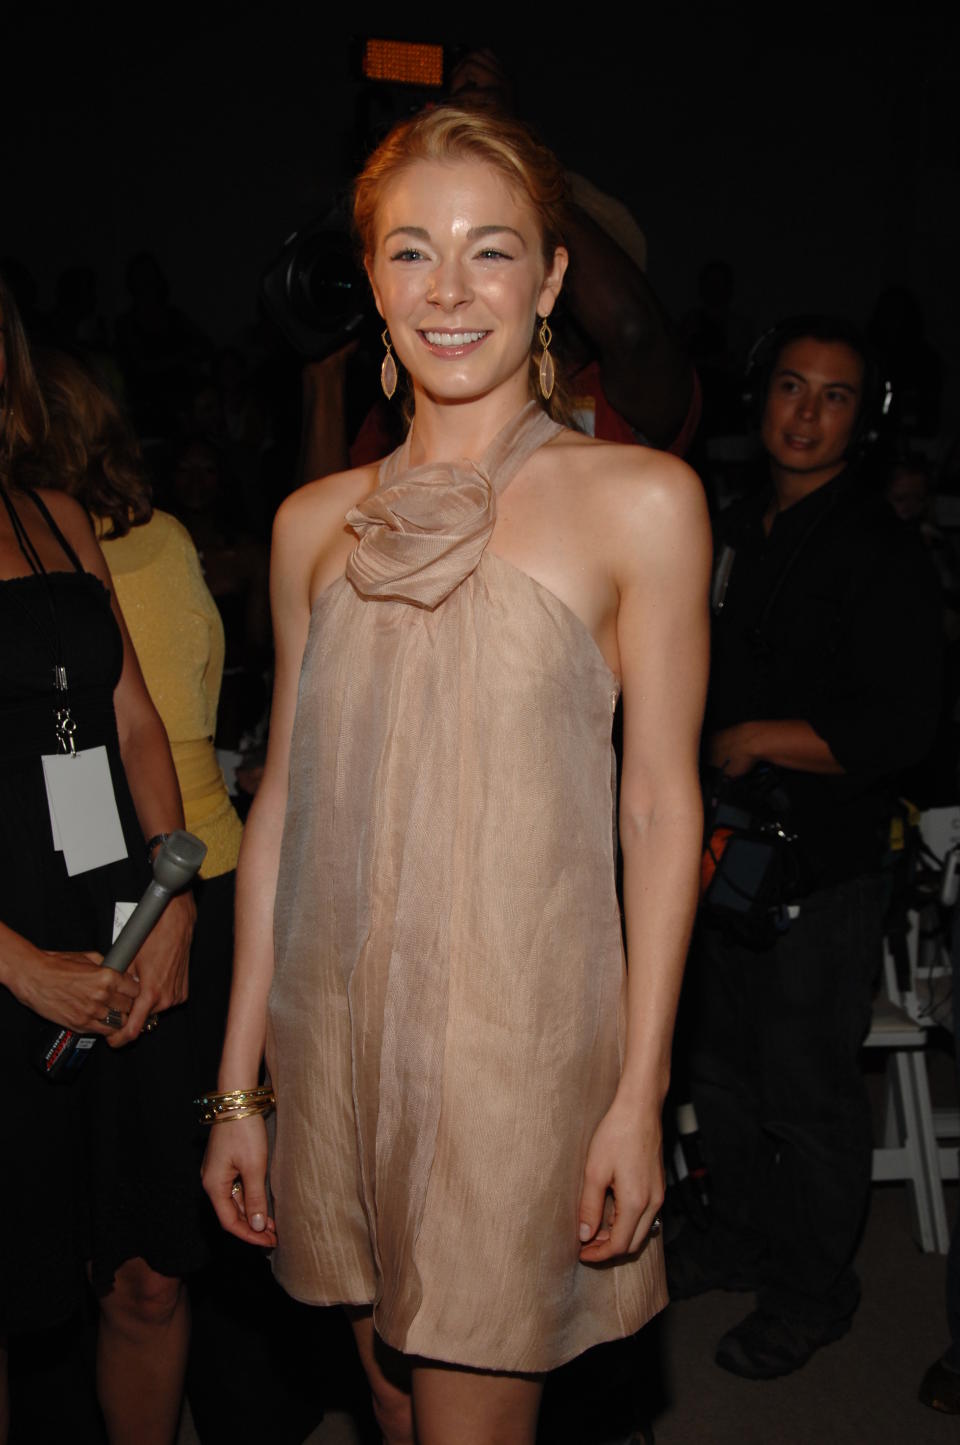 LeAnn Rimes’ Legal Battle With Her Father